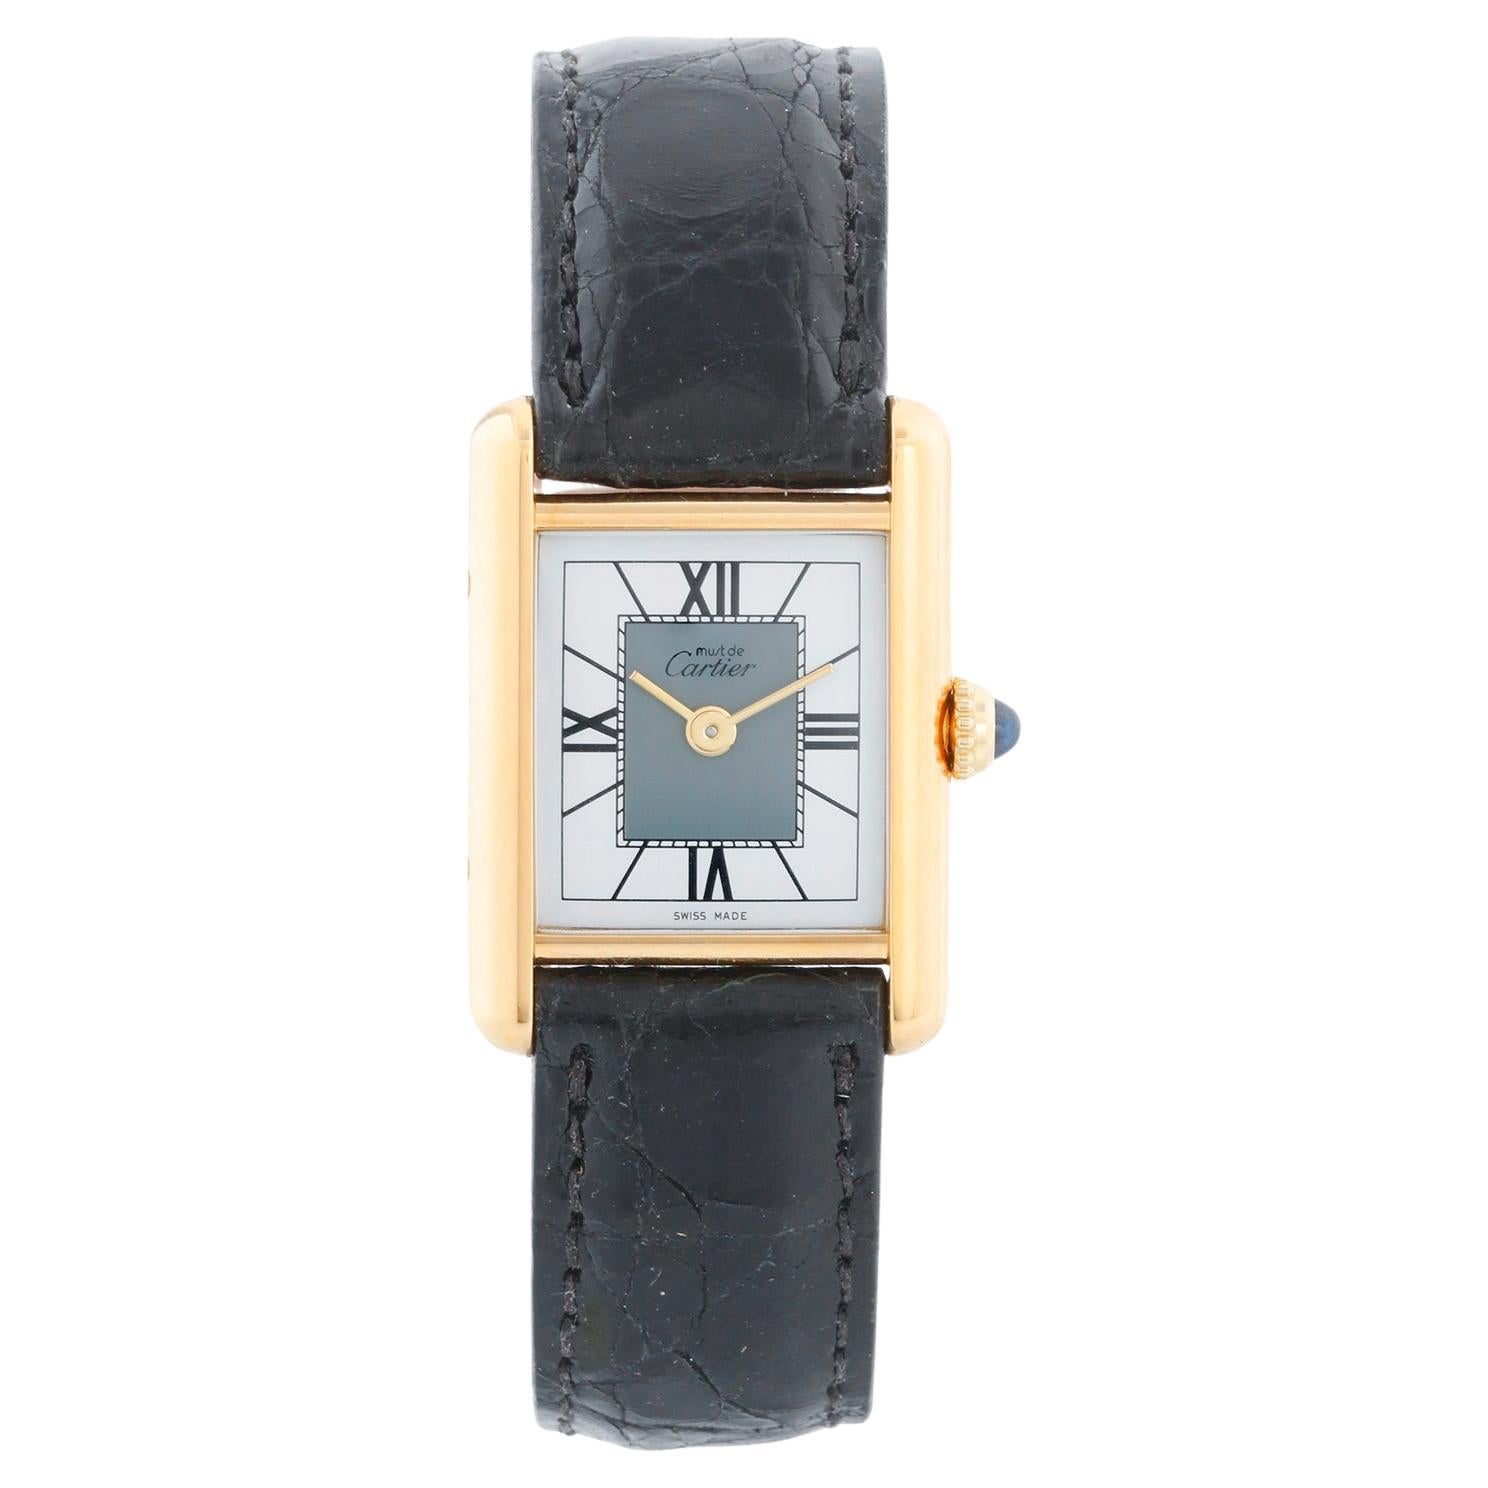 What is the most famous Cartier watch?